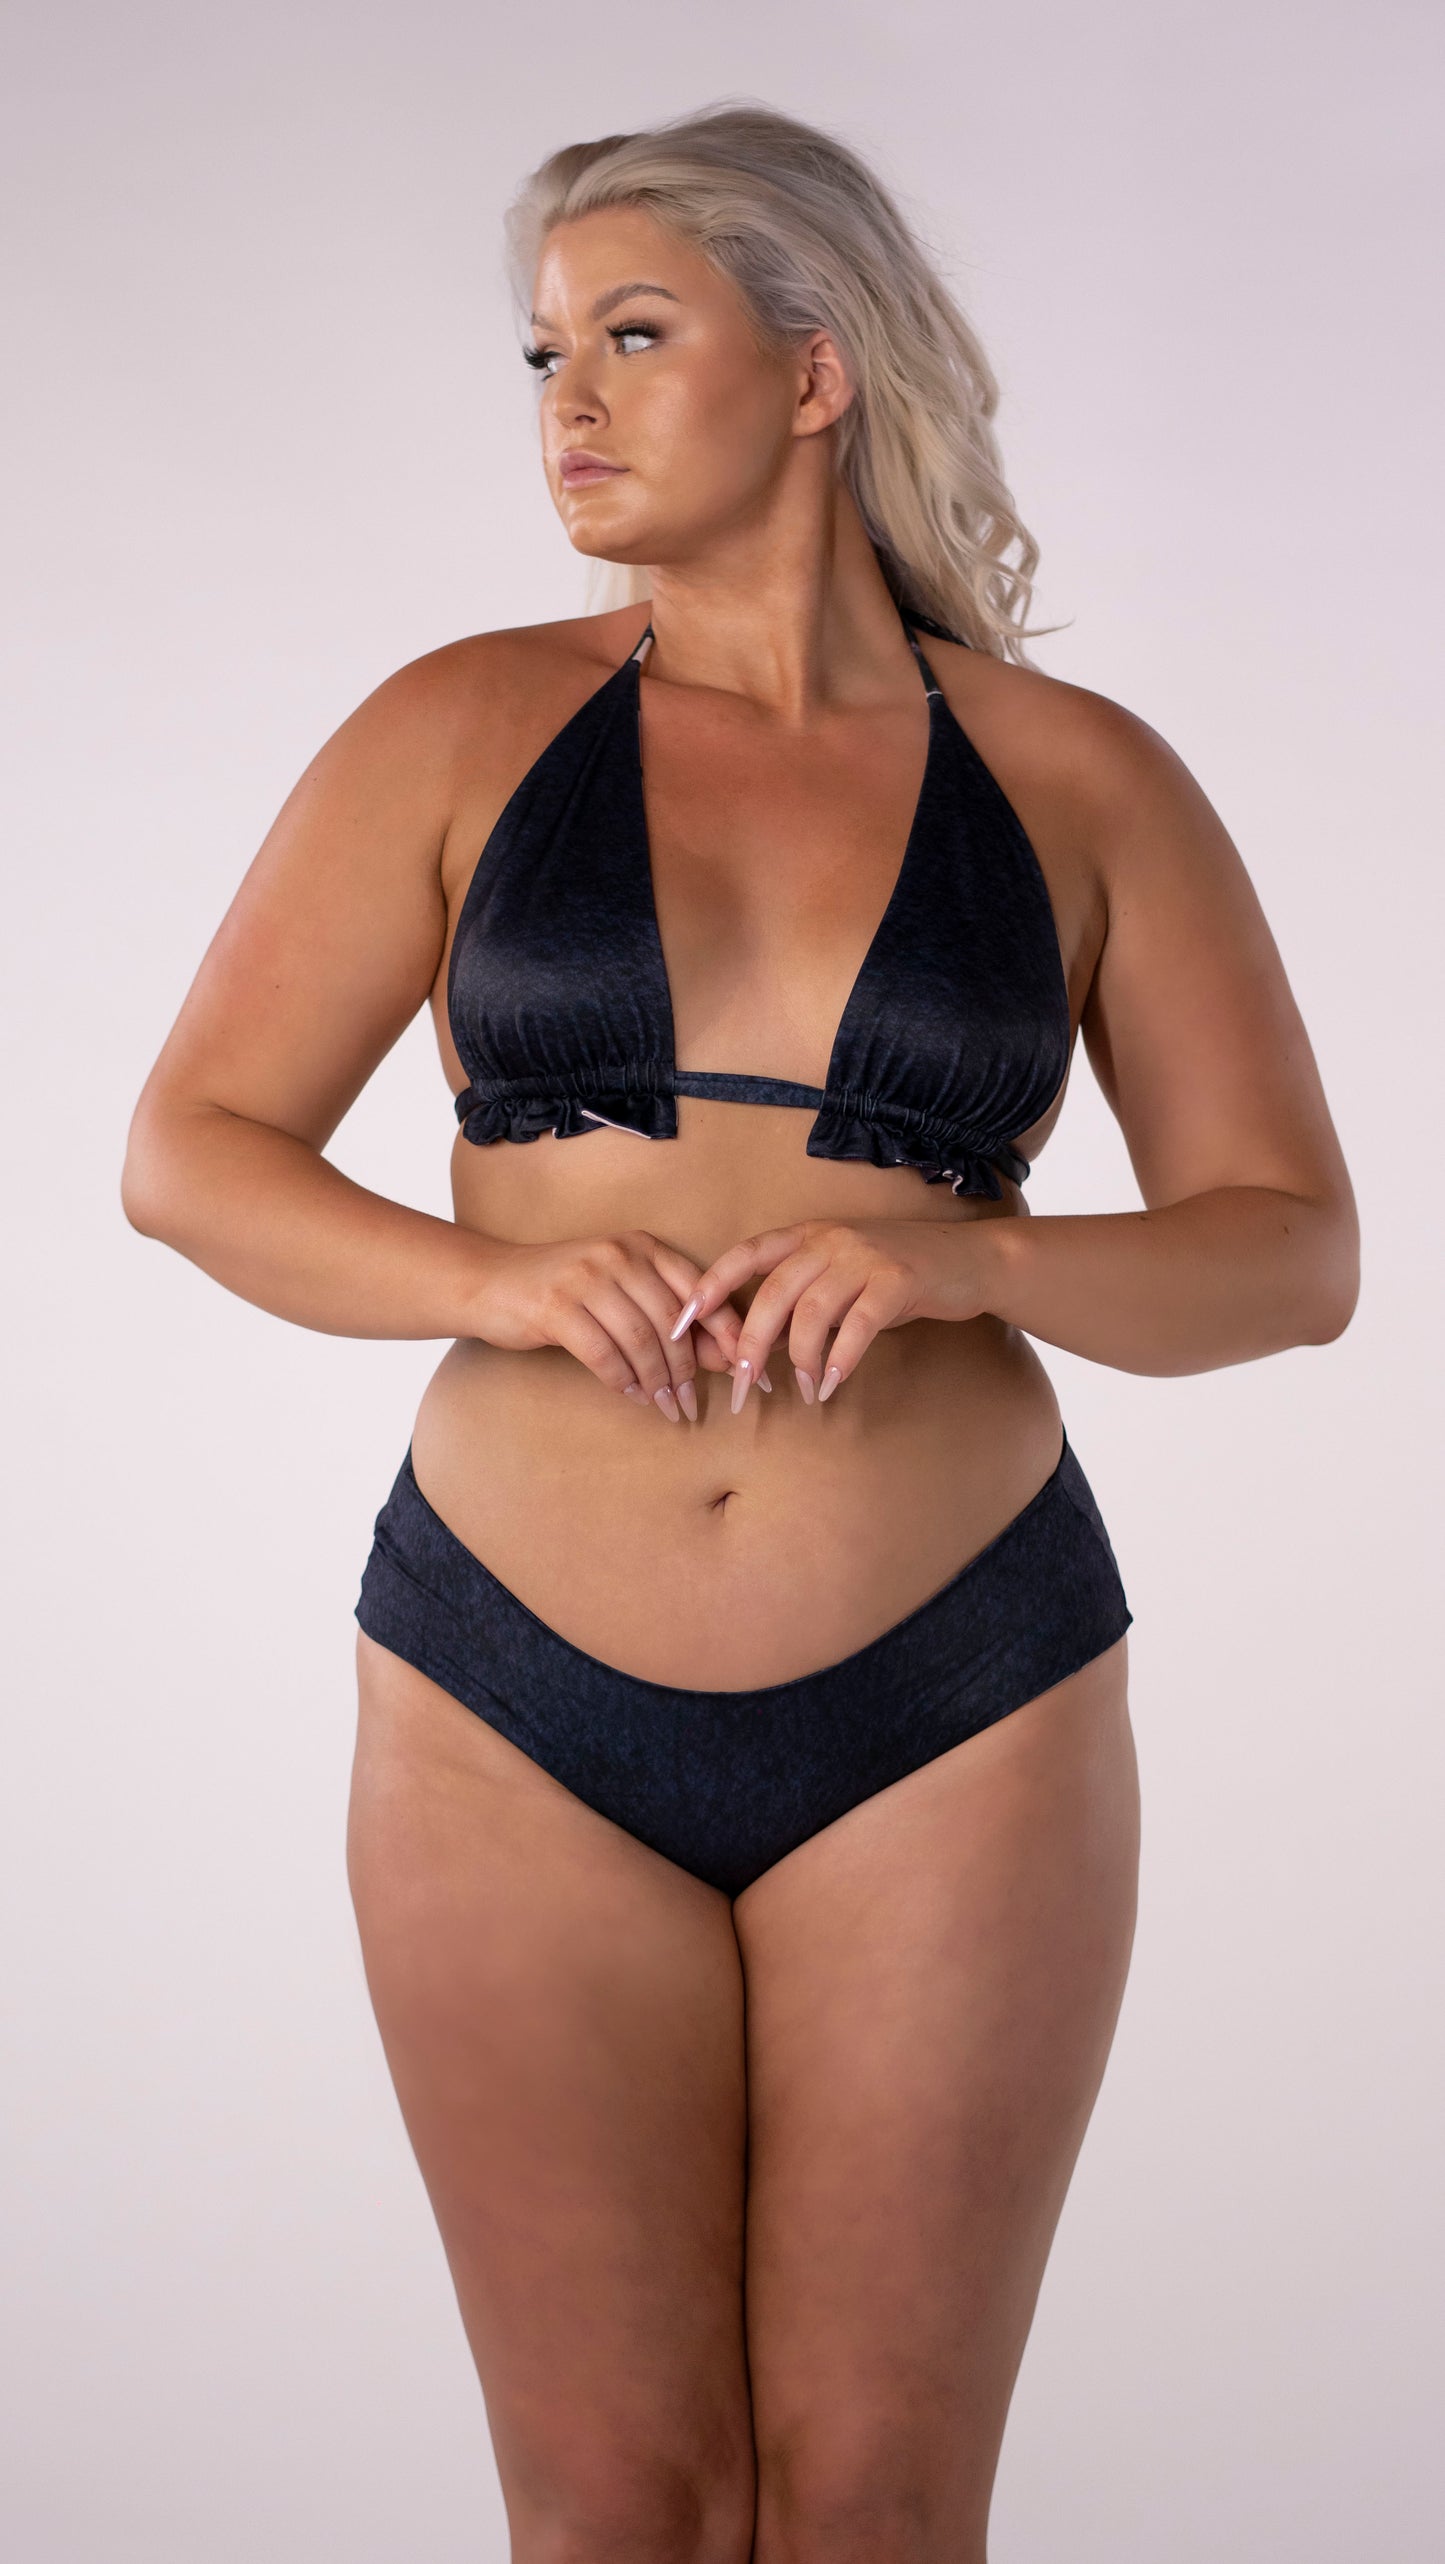 Low rise bikini bottoms with a boyish leg line to look cute and flirty! These reversible swim bottoms feature a navy blue watercolour solid wash on one side and a feminine pale pink with navy blue floral hibiscus watercolour print on the other side. Ruched detailing on the center of the bum help to accentuate your sexy curves!